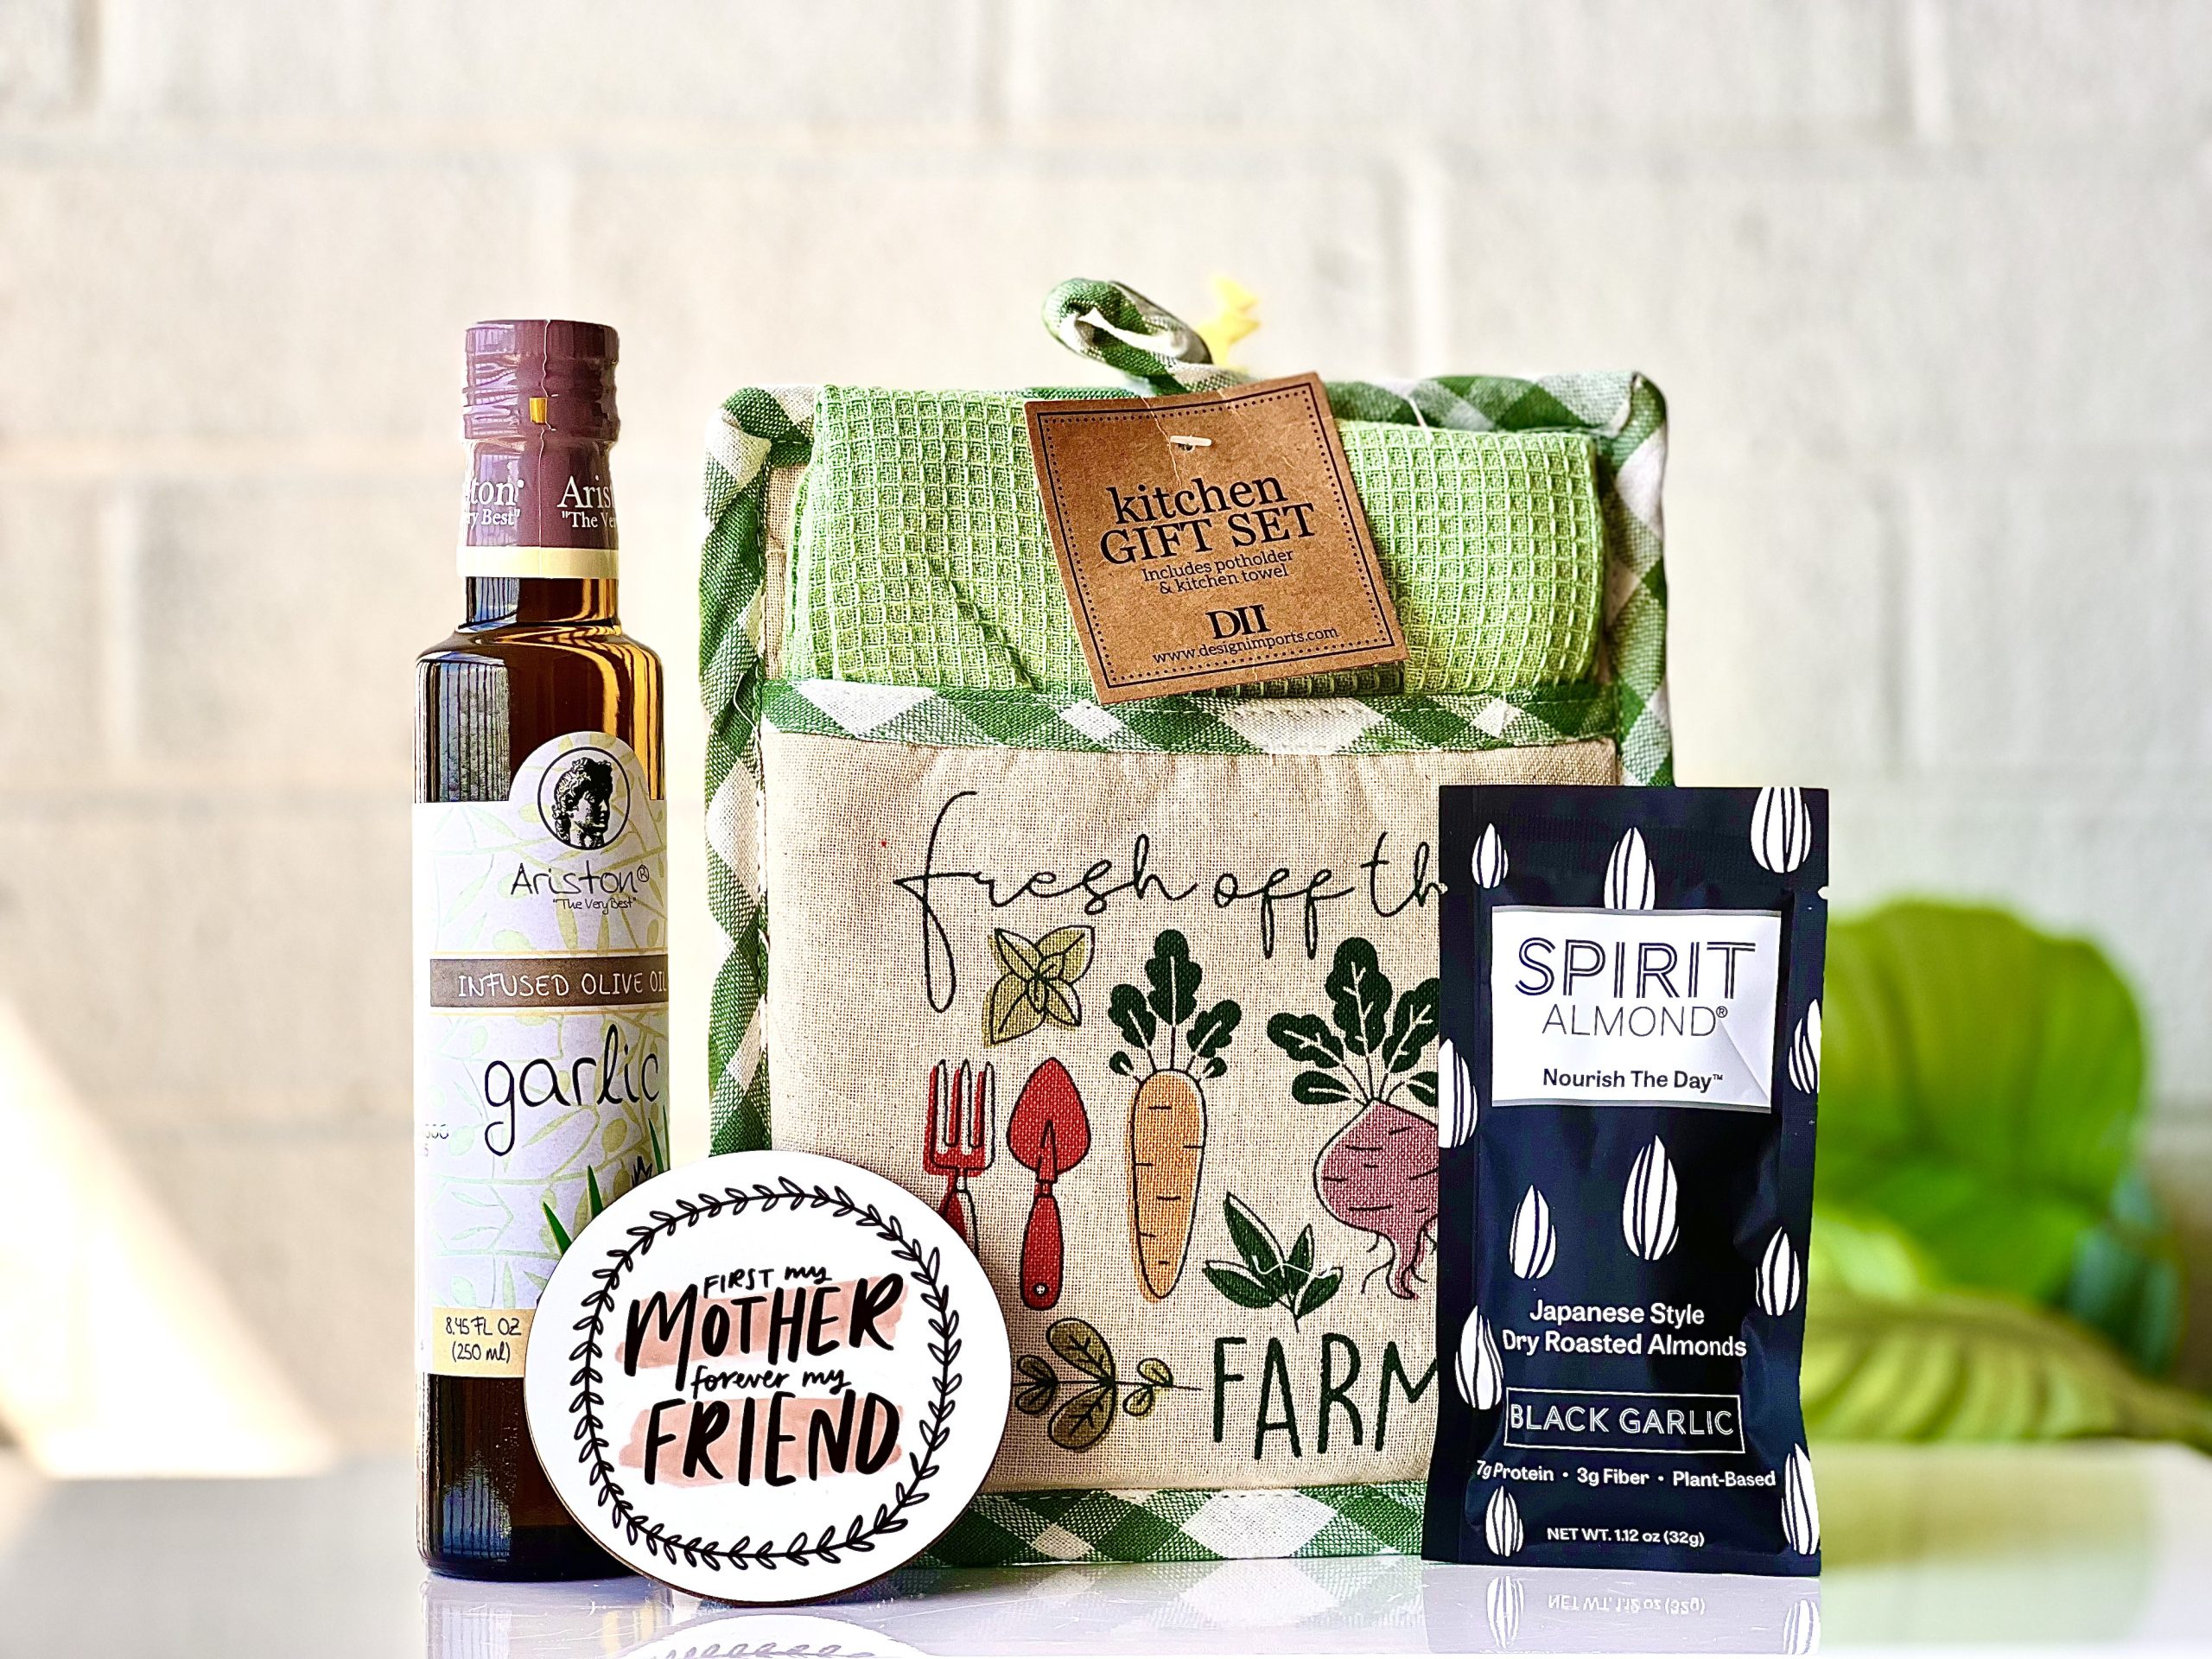 Chef's essentials – The Good Mood Gifts